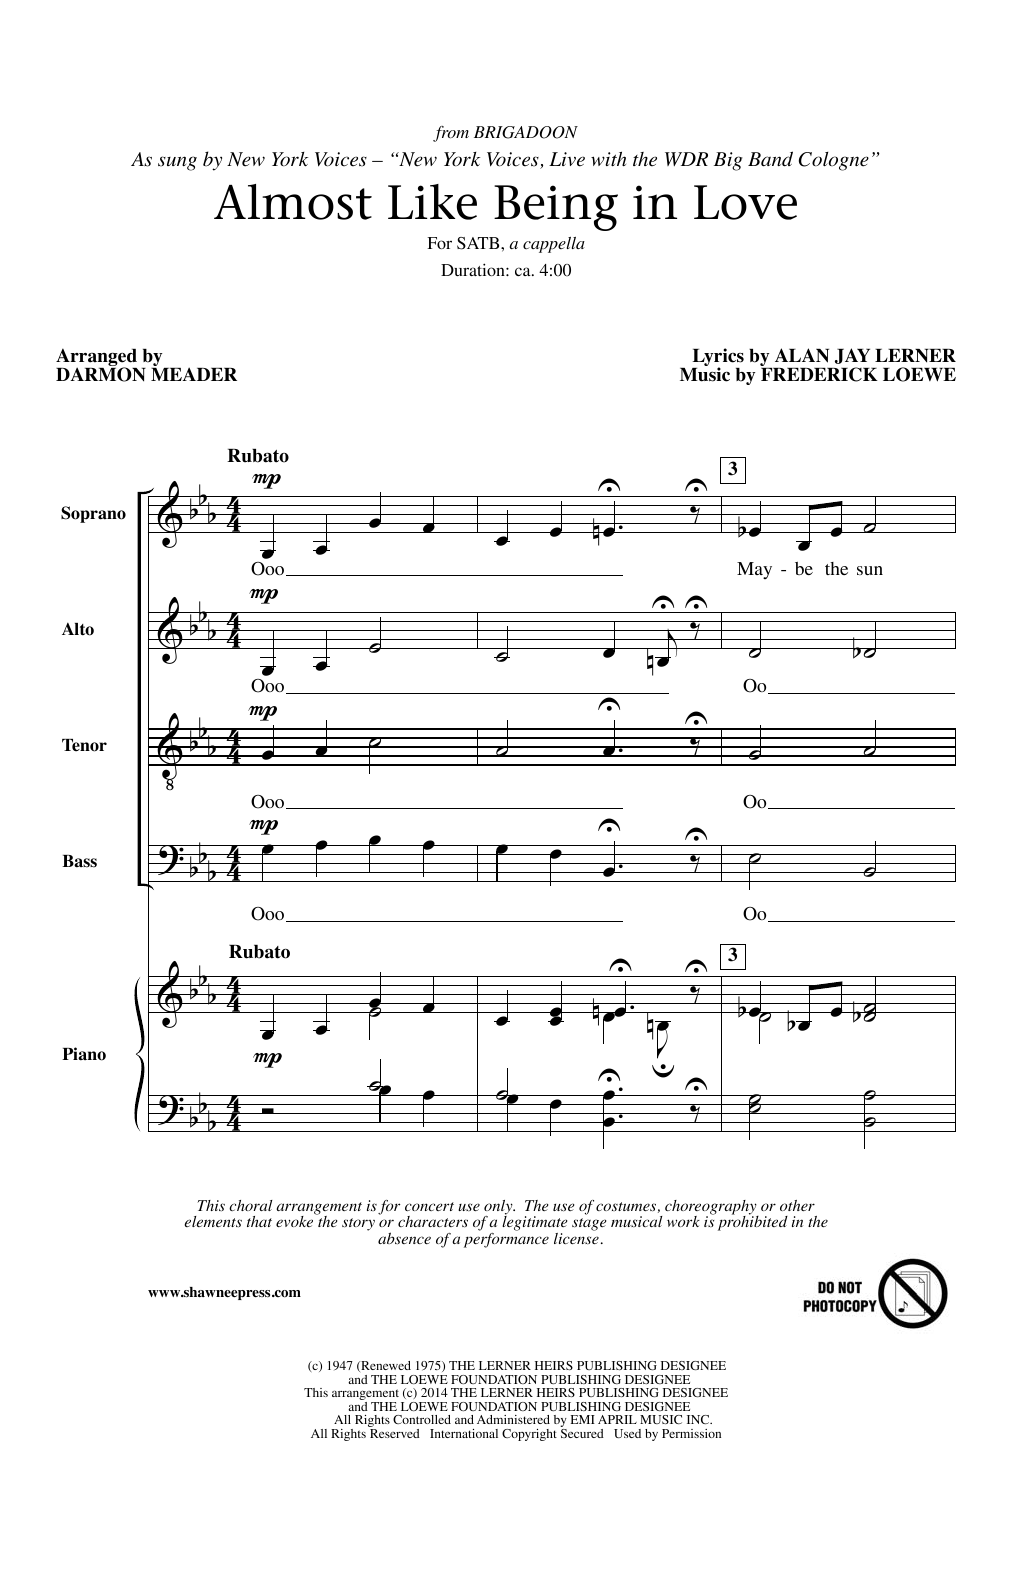 Download Darmon Meader Almost Like Being In Love Sheet Music